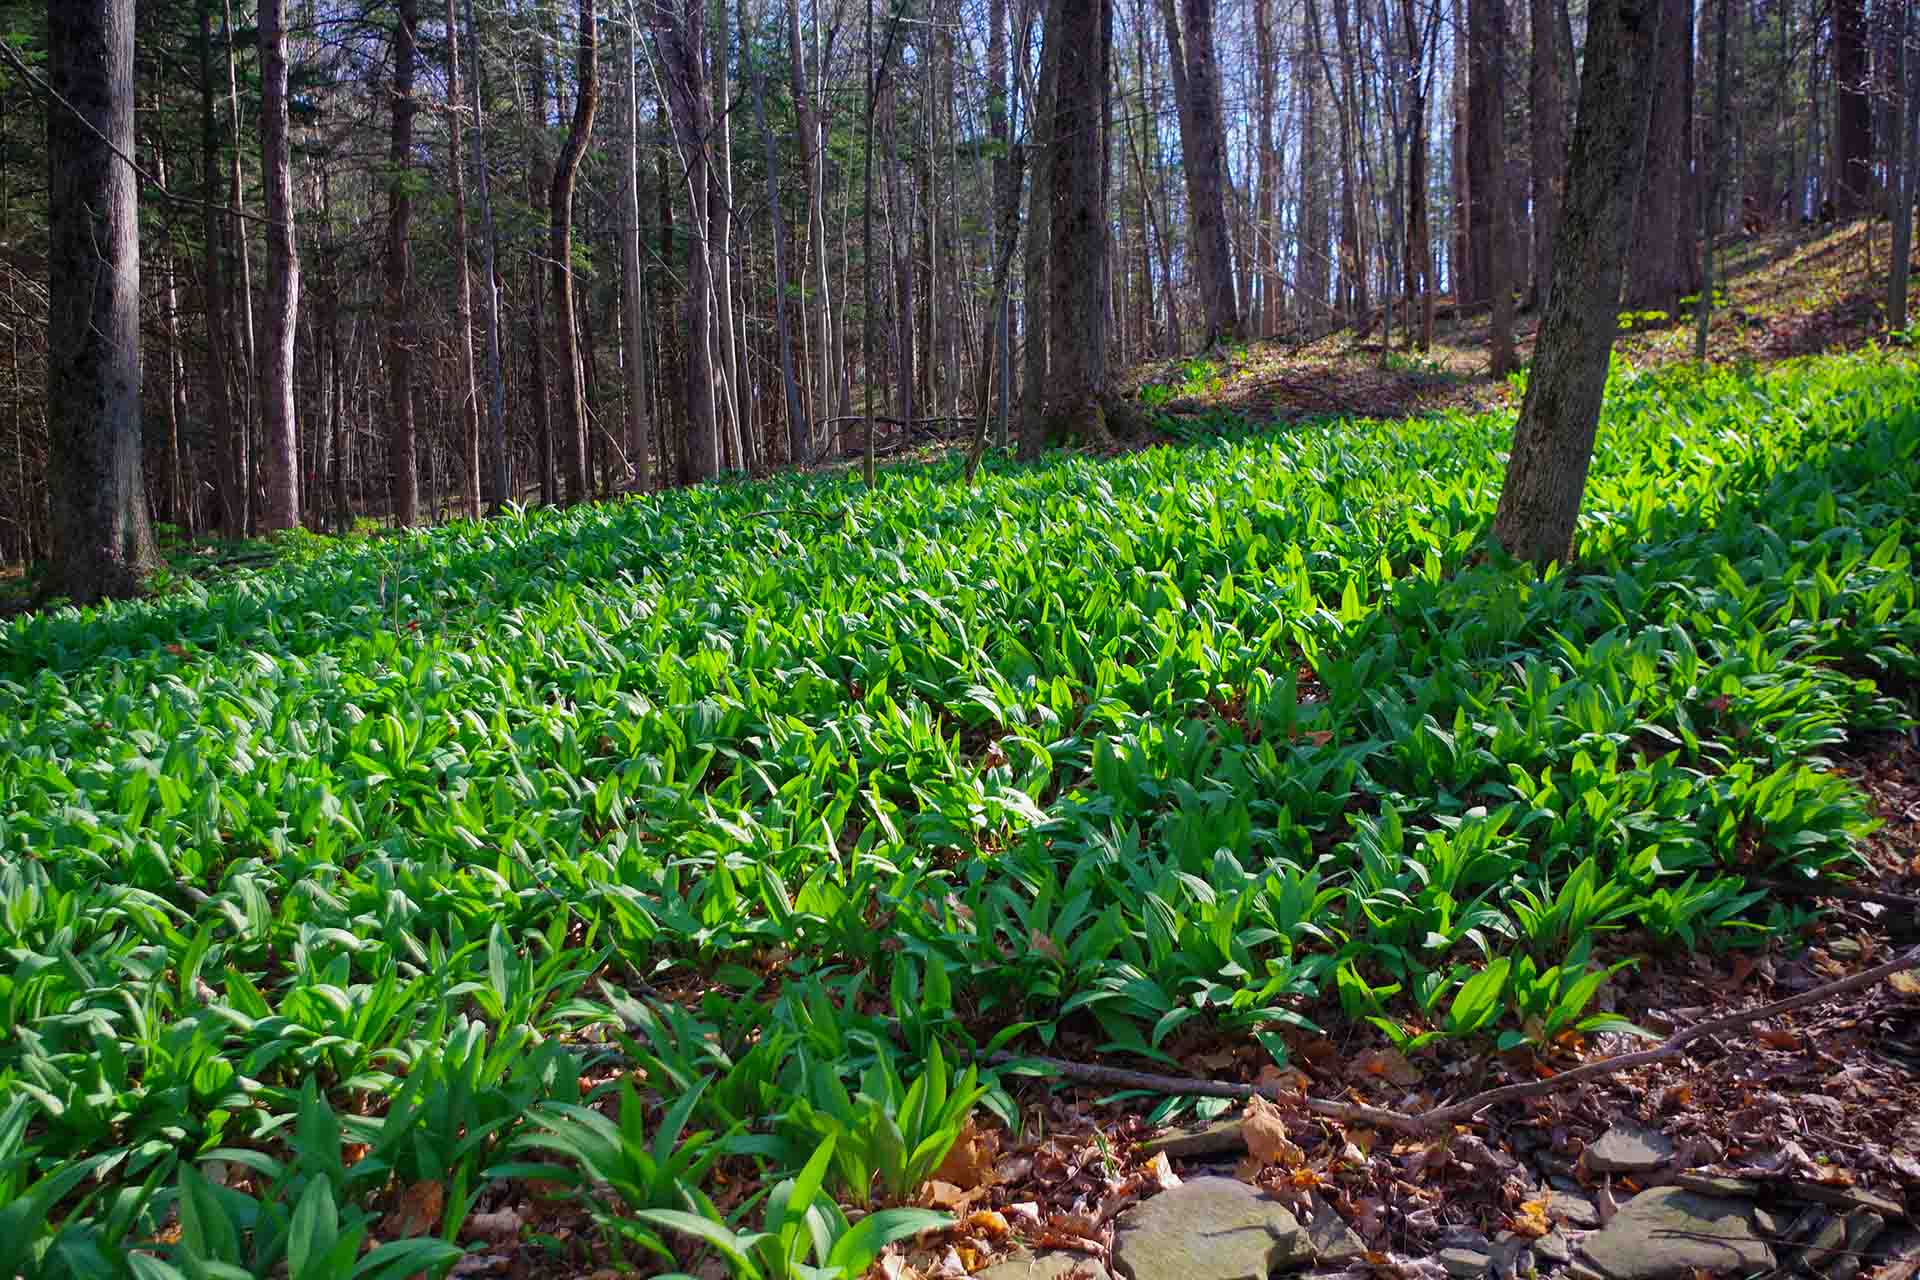 A hill in the woods filled with ramps